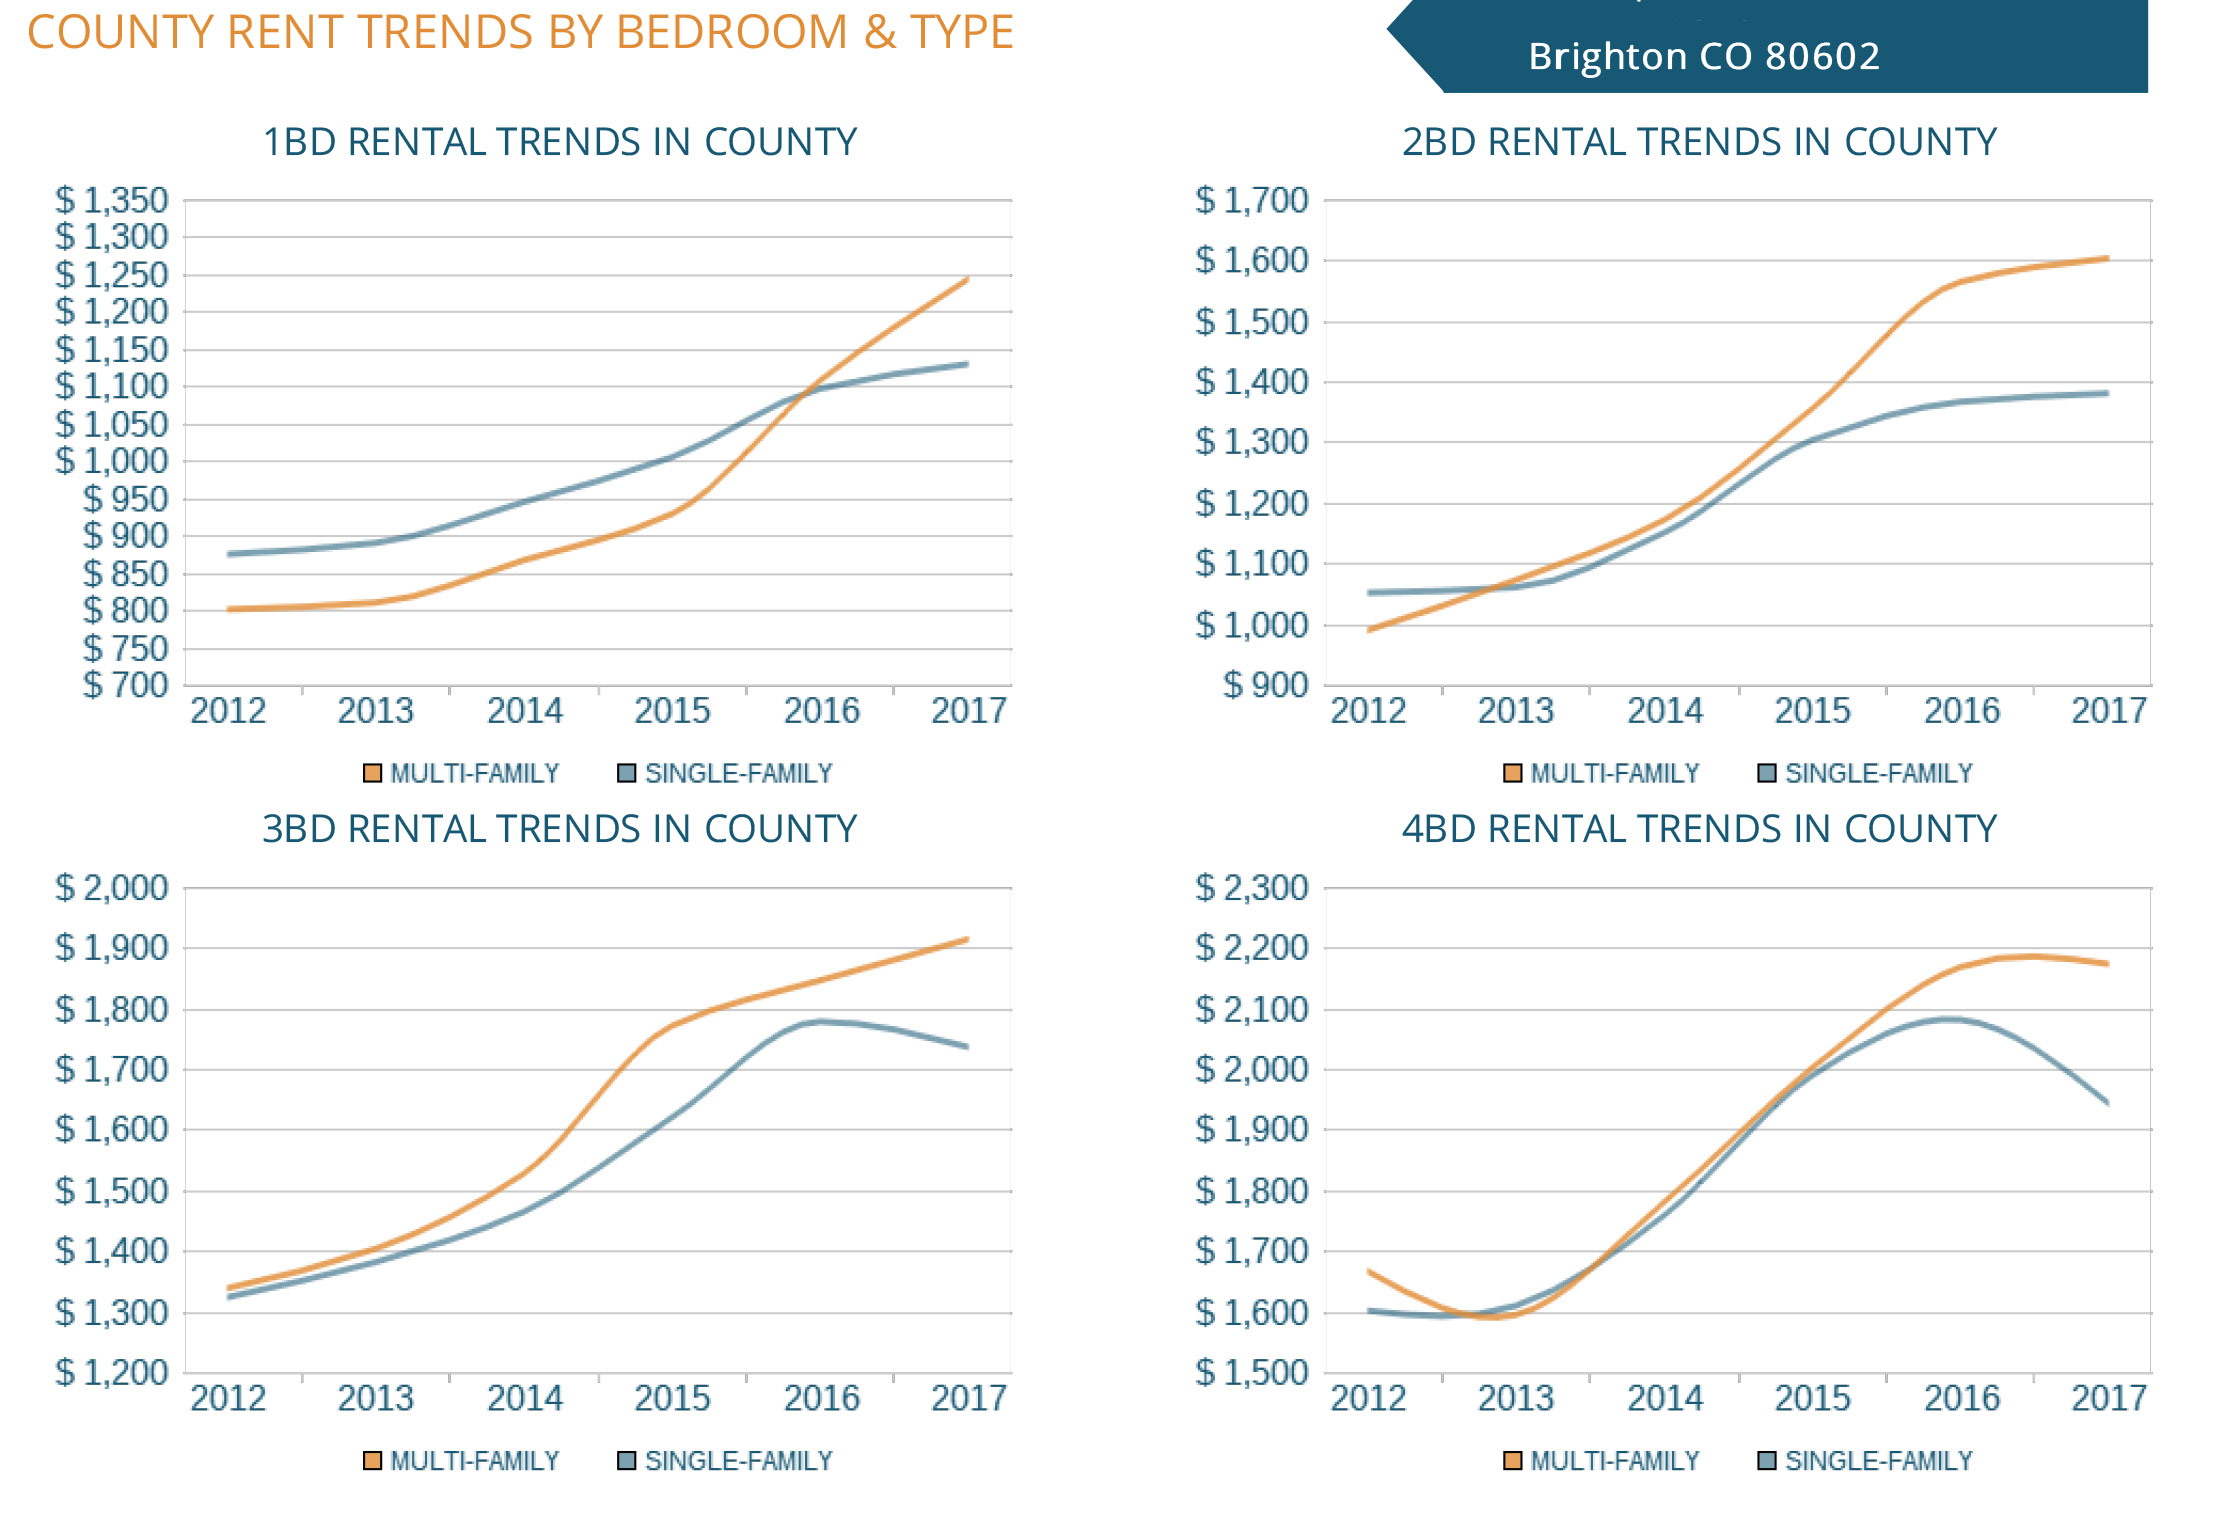 Brighton County Rent Trends By Bedroom